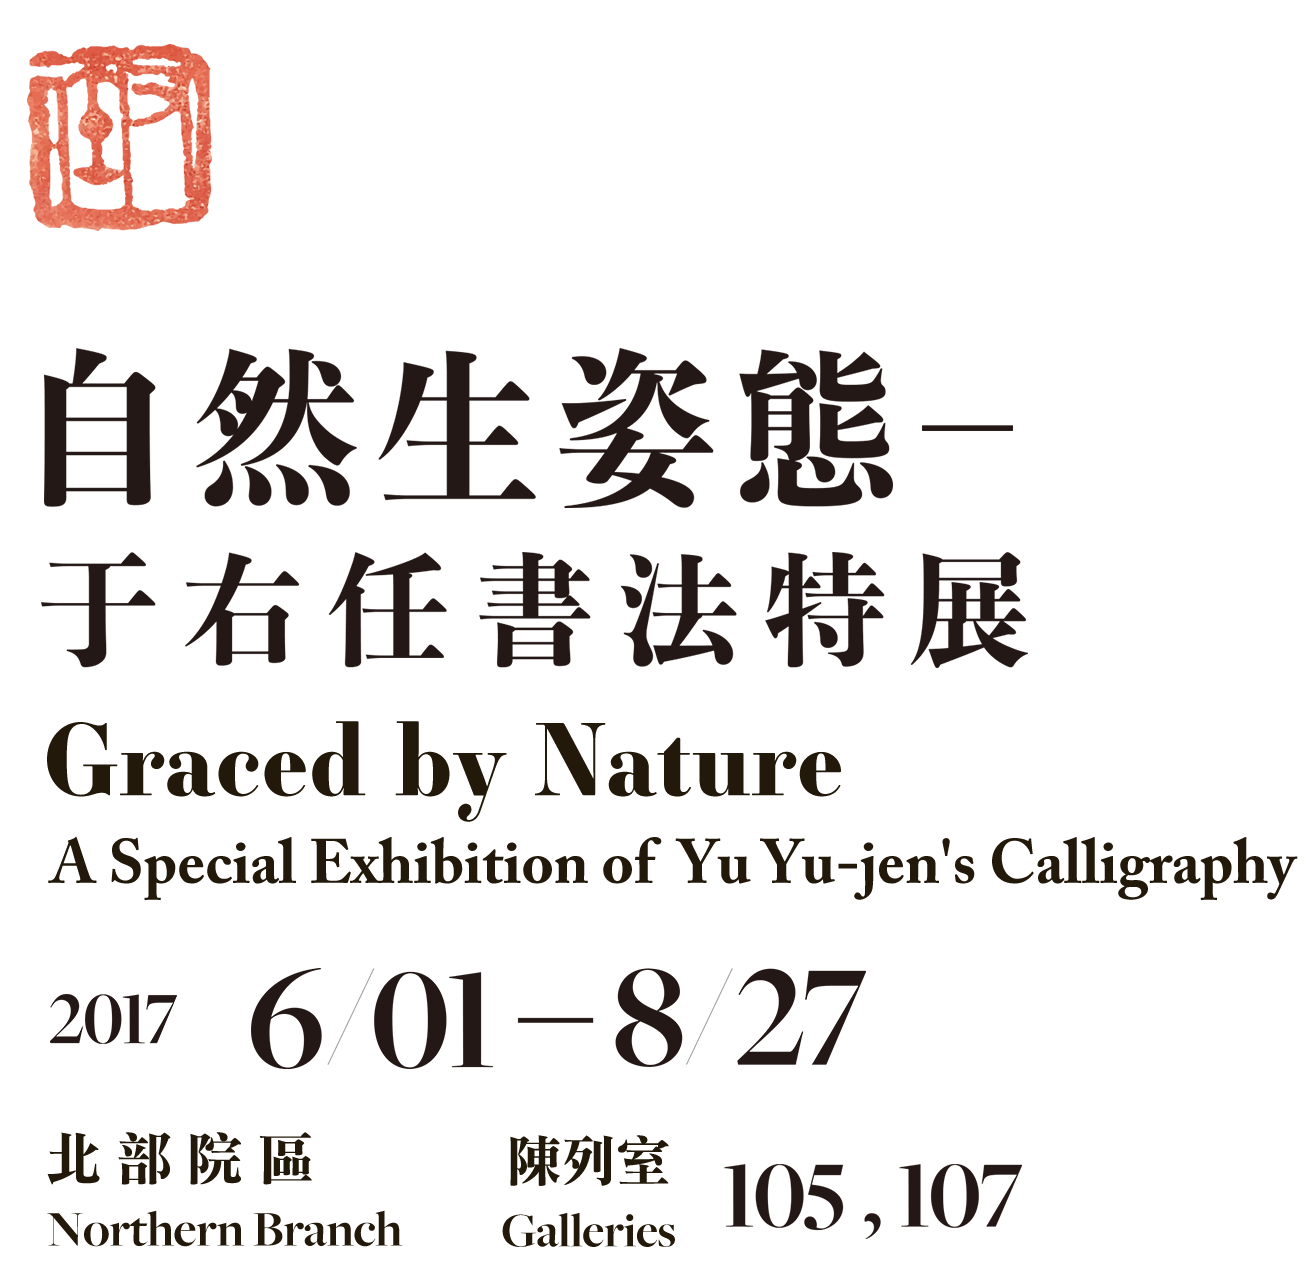 Graced by Nature: A Special Exhibition of Yu Yu-jen's Calligraphy，Period, 2017/06/01 to 2017/08/27, Galleries 105 107